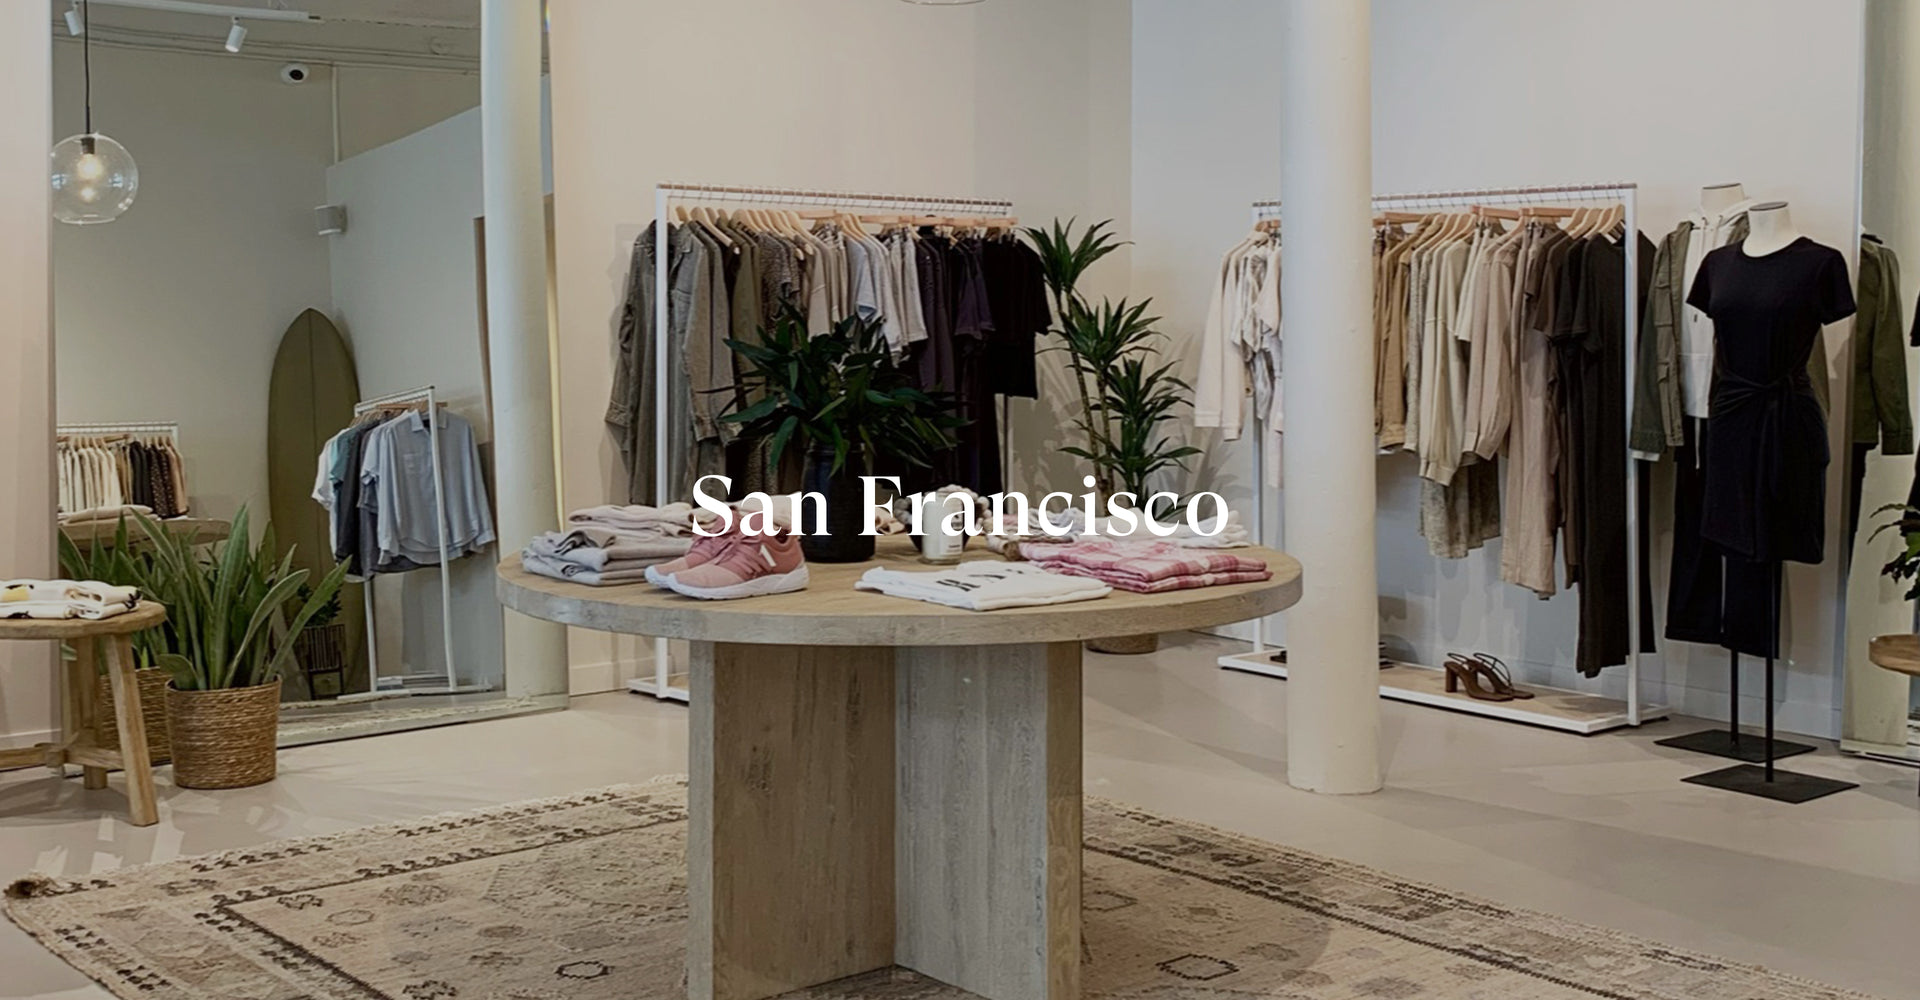 Inside of San Francisco store